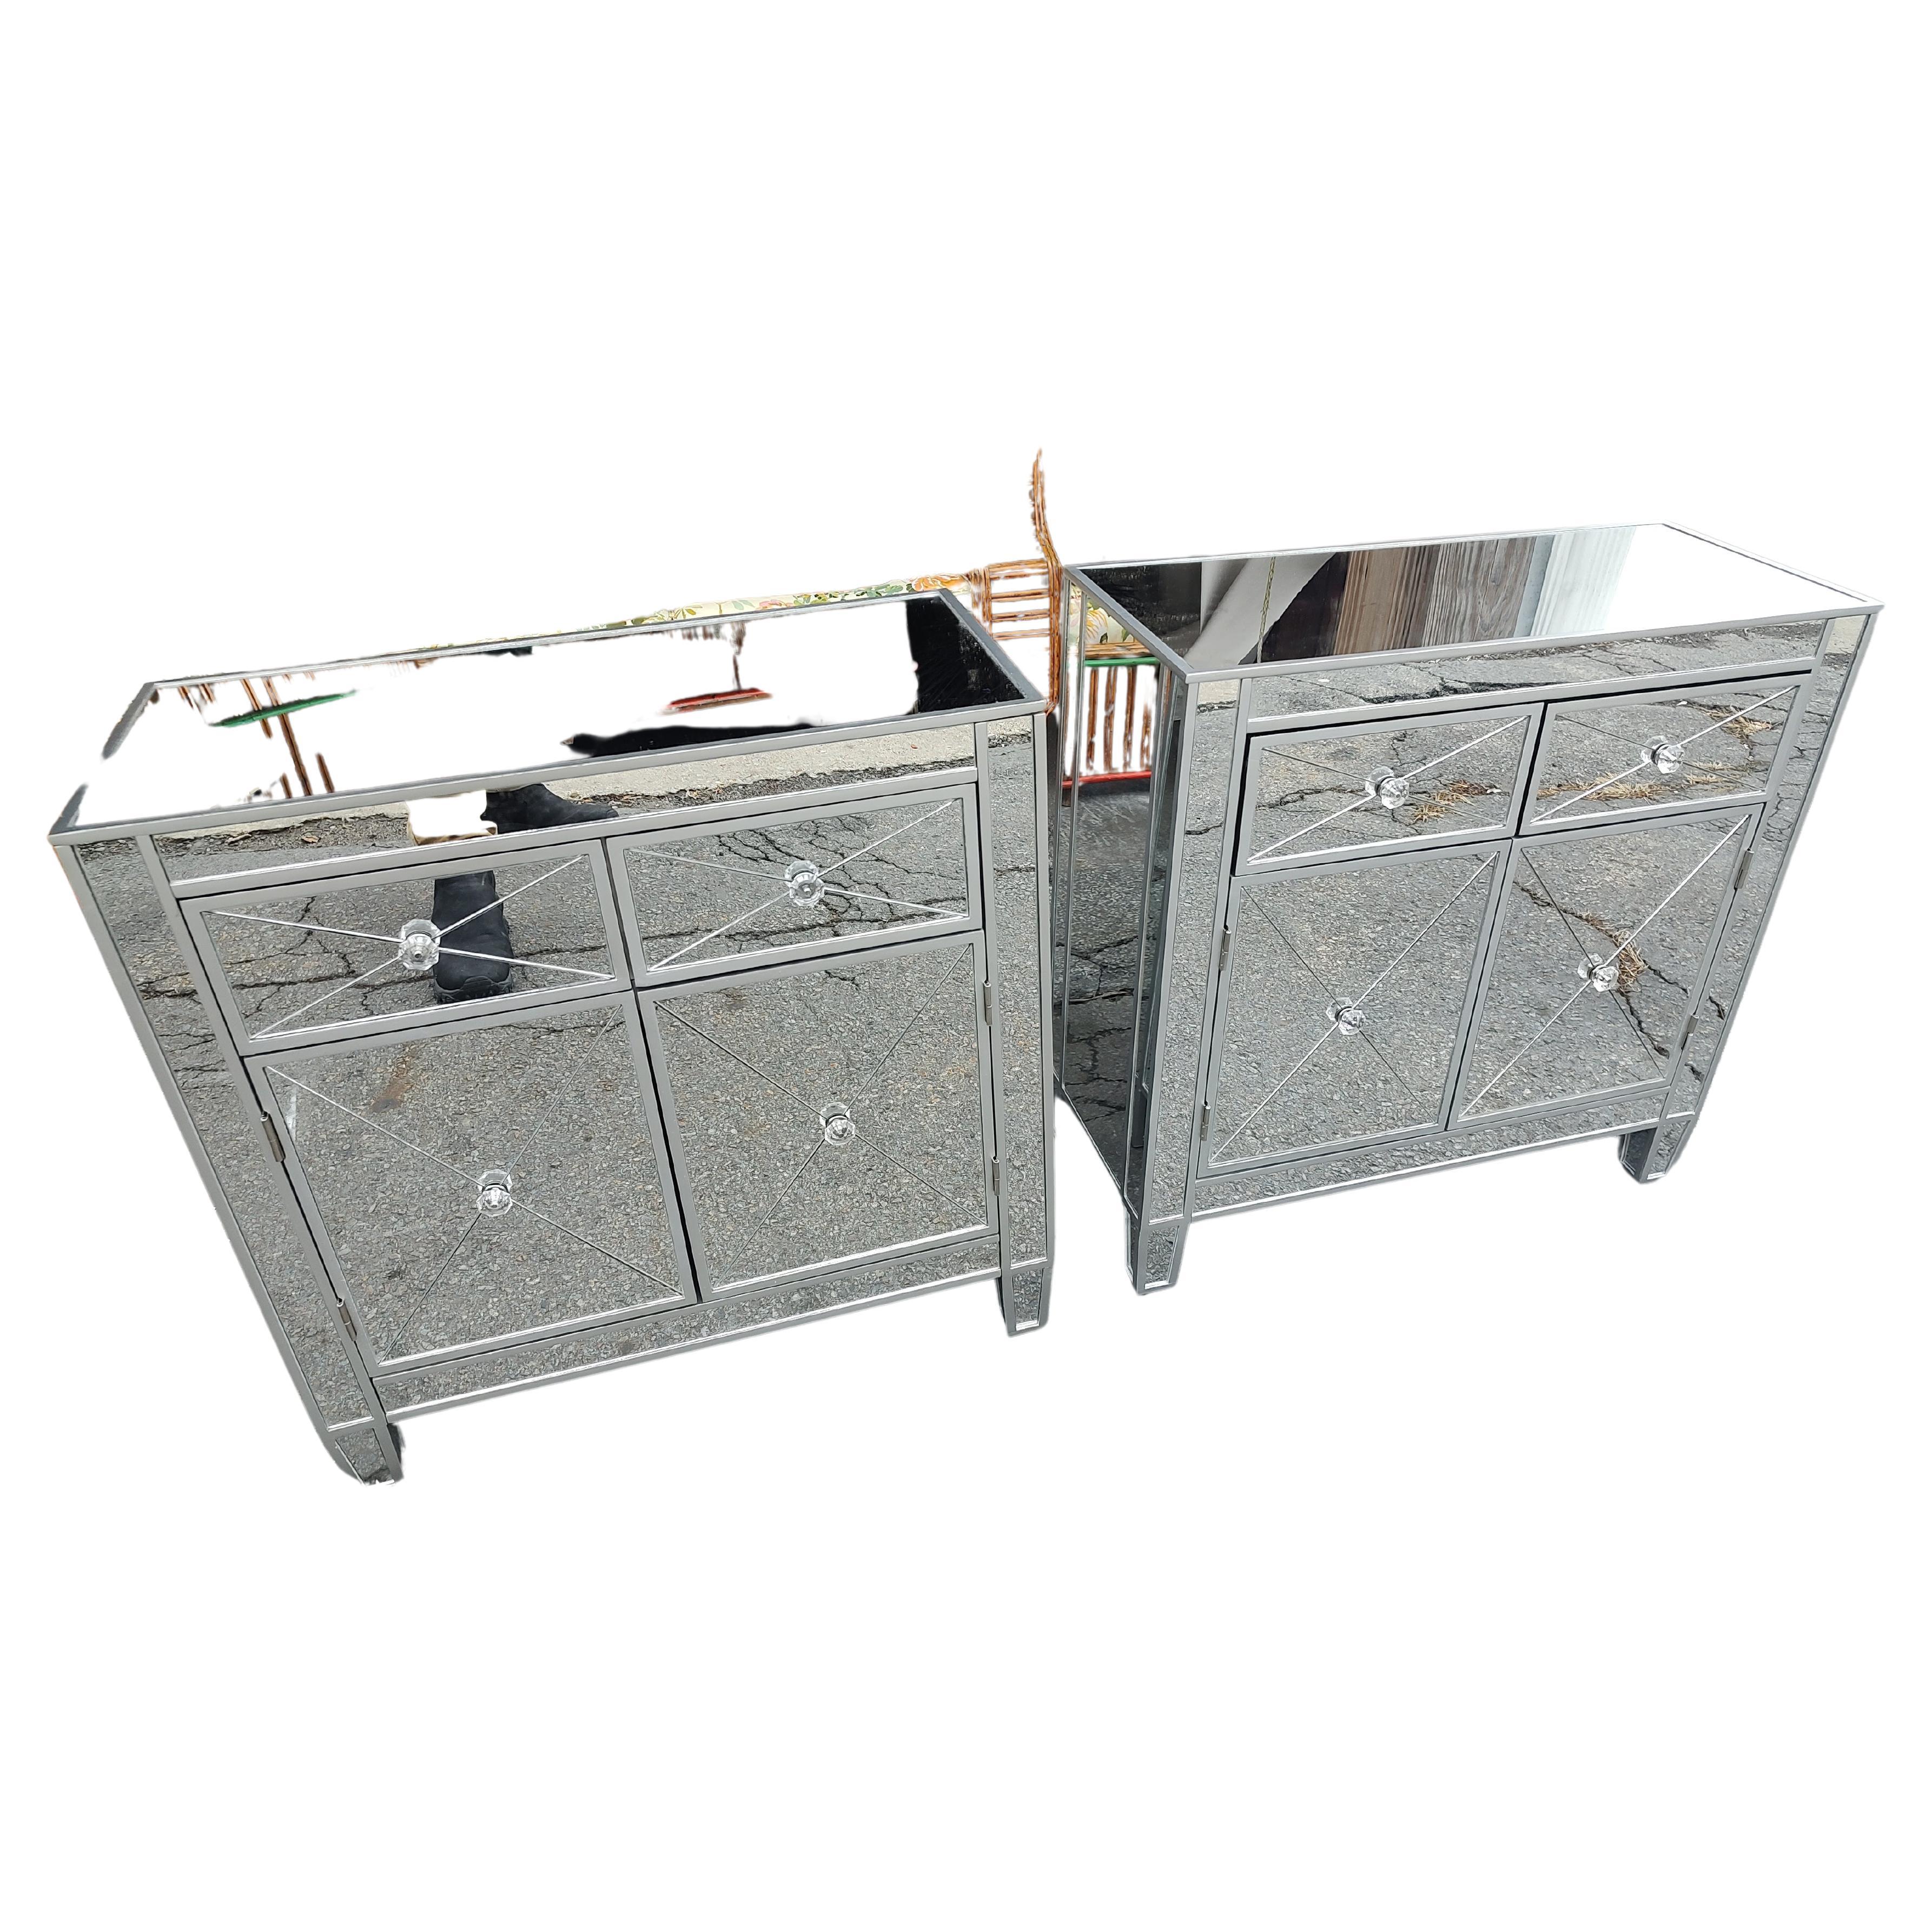 Contemporary Pair of Mirrored Night Stands / Tables 2 Drawer over 2 Door For Sale